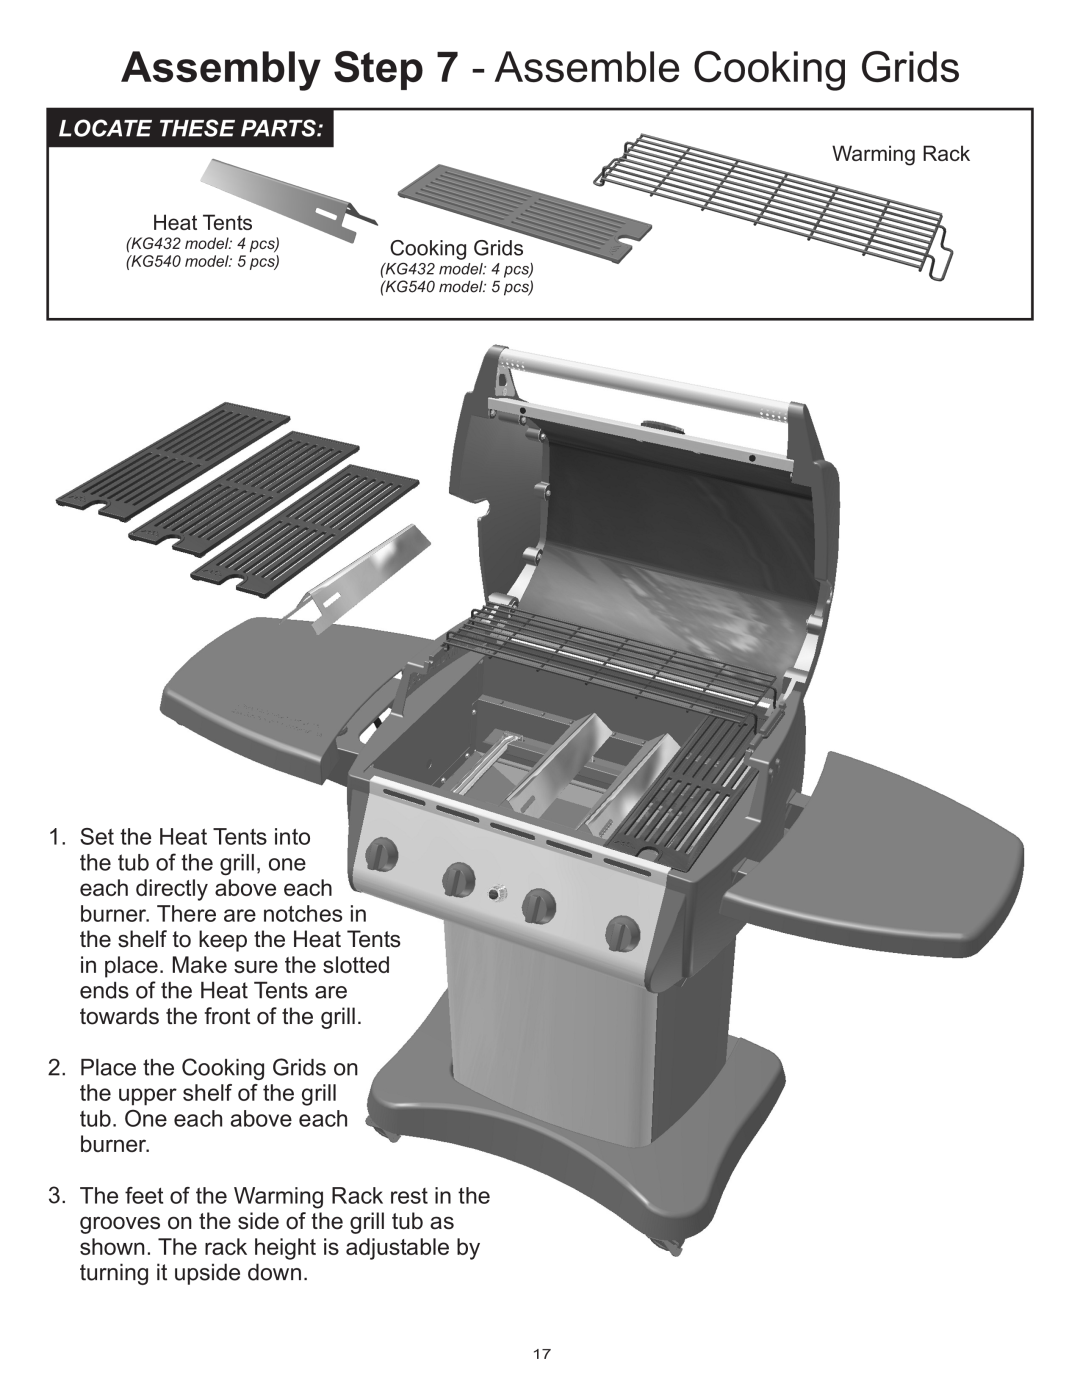 Vermont Casting Gas Grill owner manual Assembly - Assemble Cooking Grids, Locate These Parts, Heat Tents 